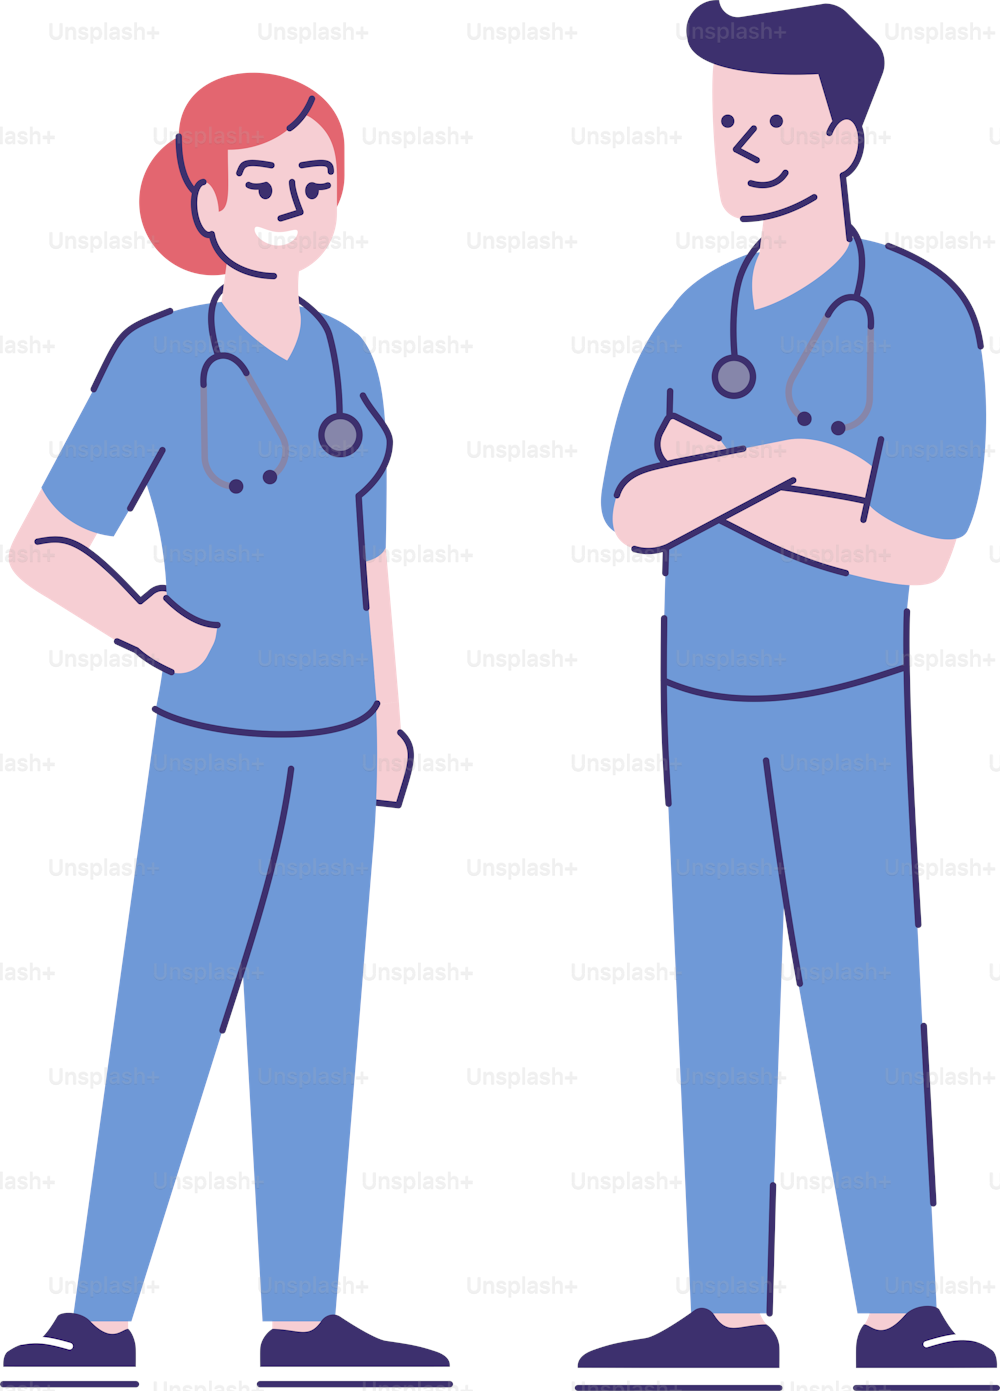 Male and female nurses flat vector characters. Medical caretakers cartoon illustration with outline. Professional caregivers. Doctors, therapists, general practitioners couple isolated on white